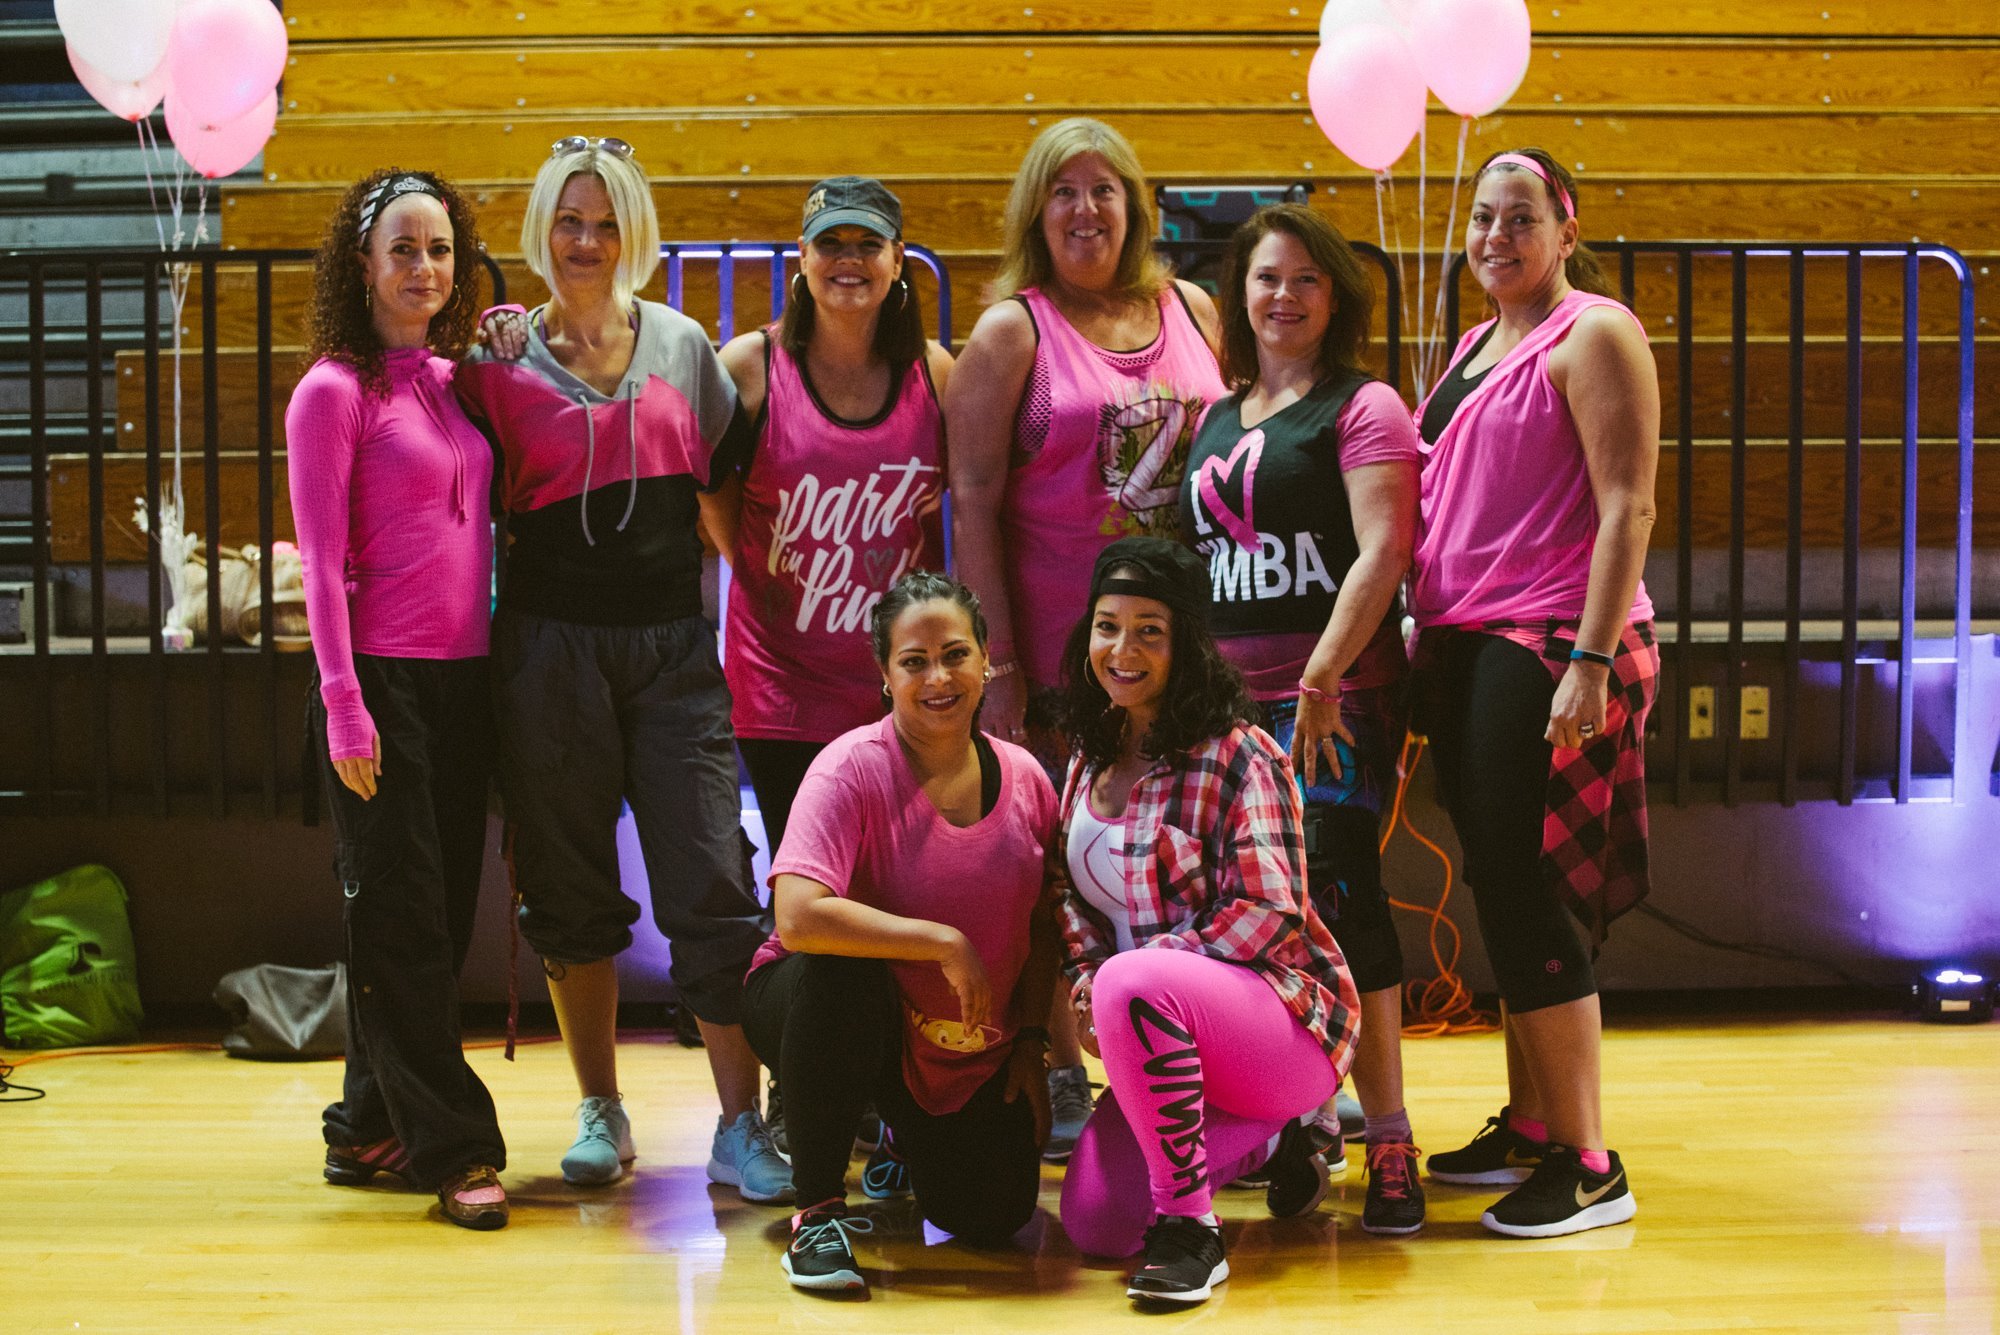 The Party in Pink Zumbathon was hosted by MPower Fitness and Crazy Sock Divas.  Courtesy photo by D. Sena Photography